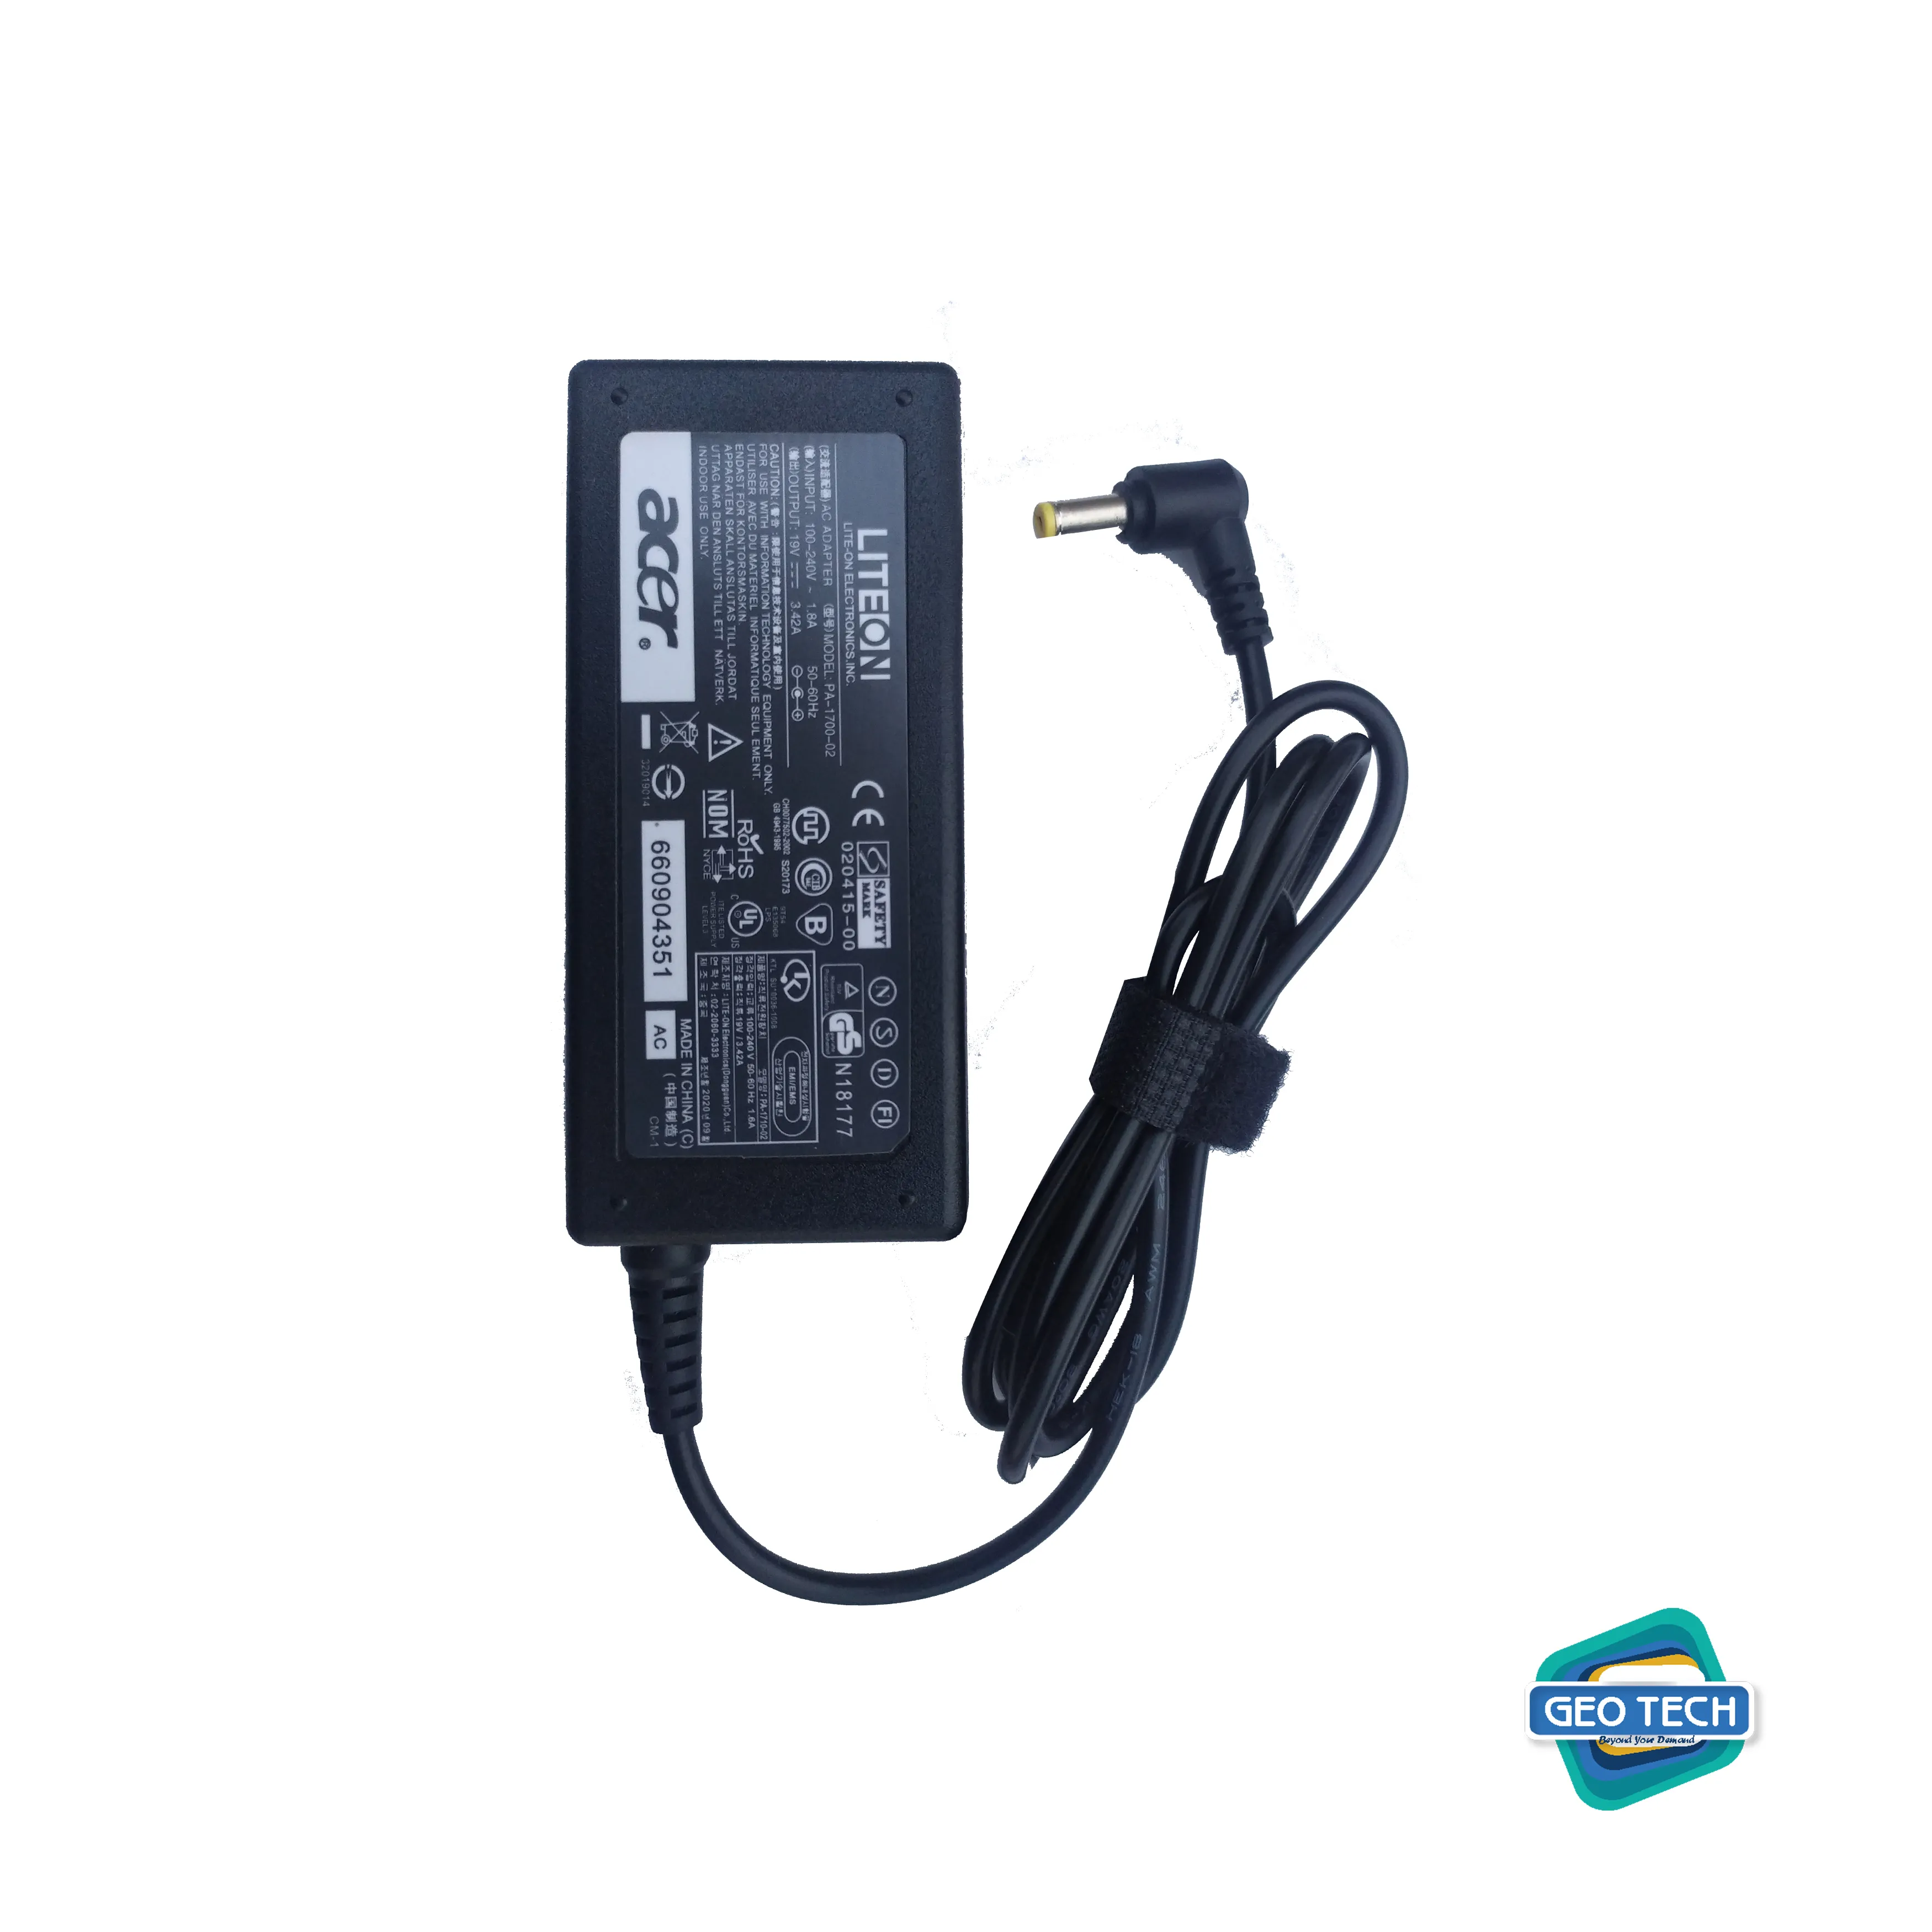 19V 3.42A PA-1700-02 AC Adapter Power Supply for Acer Chromebook C7 C710 C710-2847 C710-2856 C710-2457 C710-2815 C710-2833 C710-2834 PA-1650-01 PA-1650-02 PA-1650-22 ADP-65DB PA-1650-69